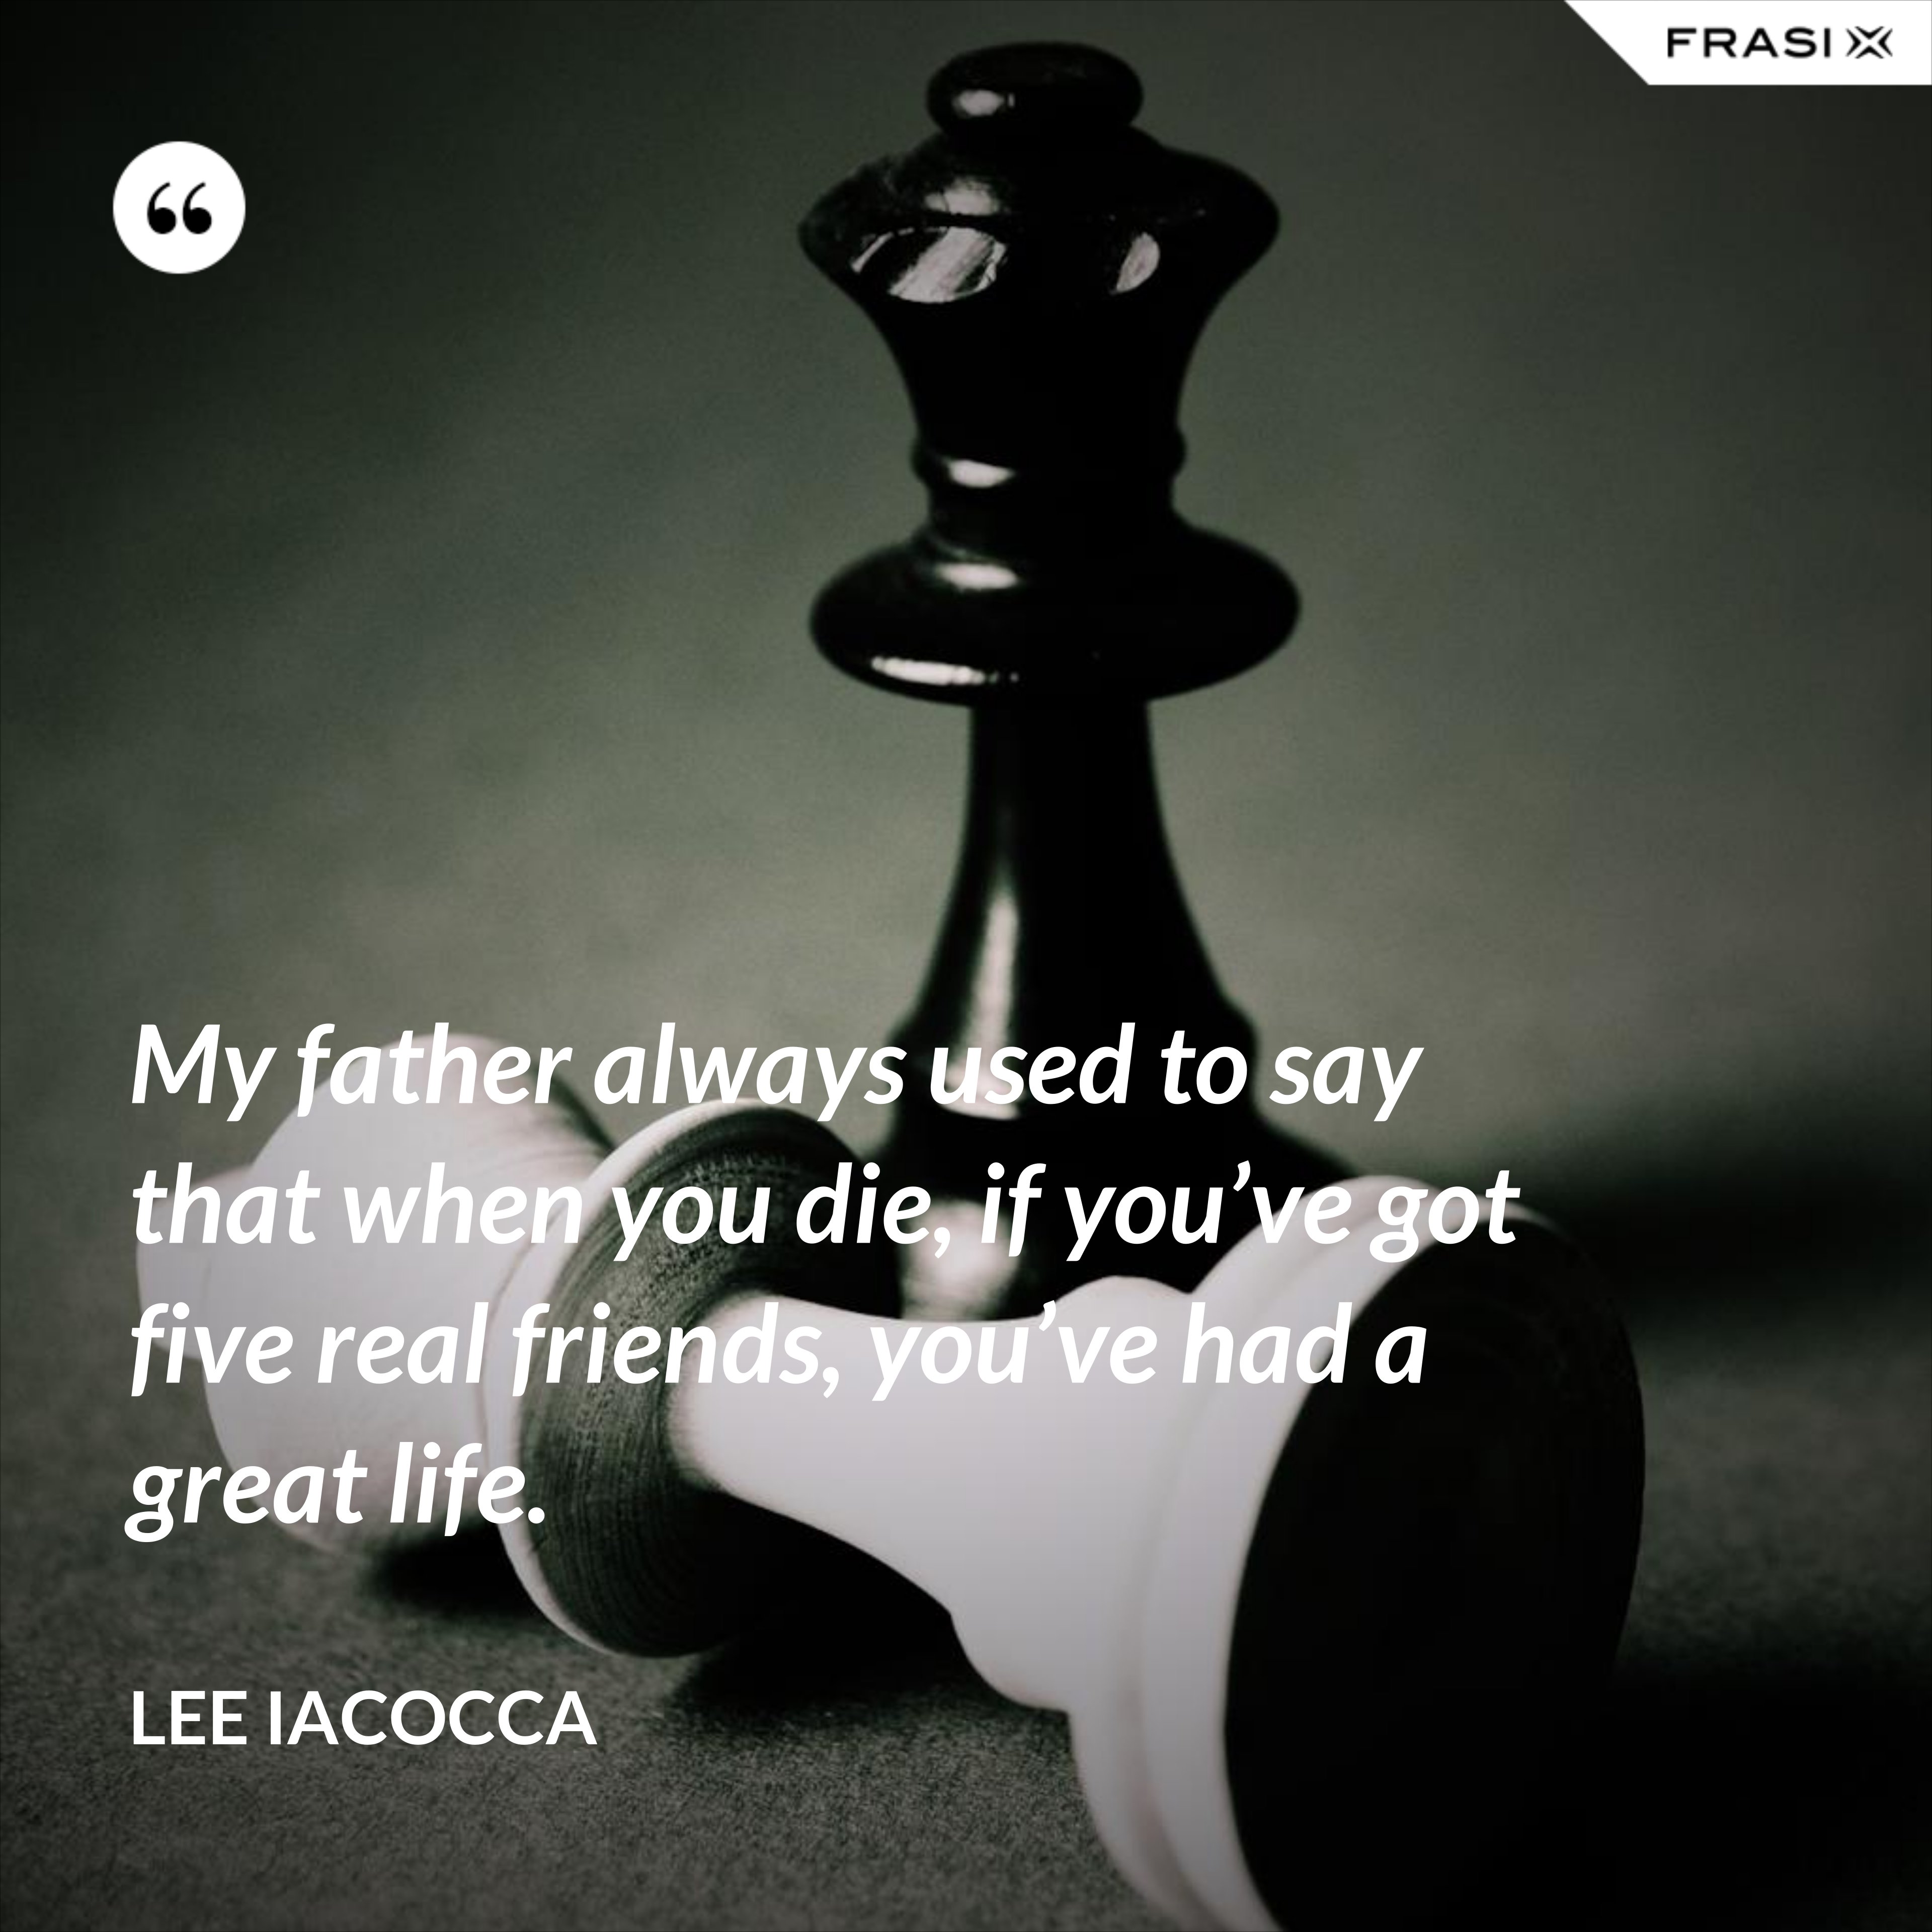 My father always used to say that when you die, if you’ve got five real friends, you’ve had a great life. - Lee Iacocca